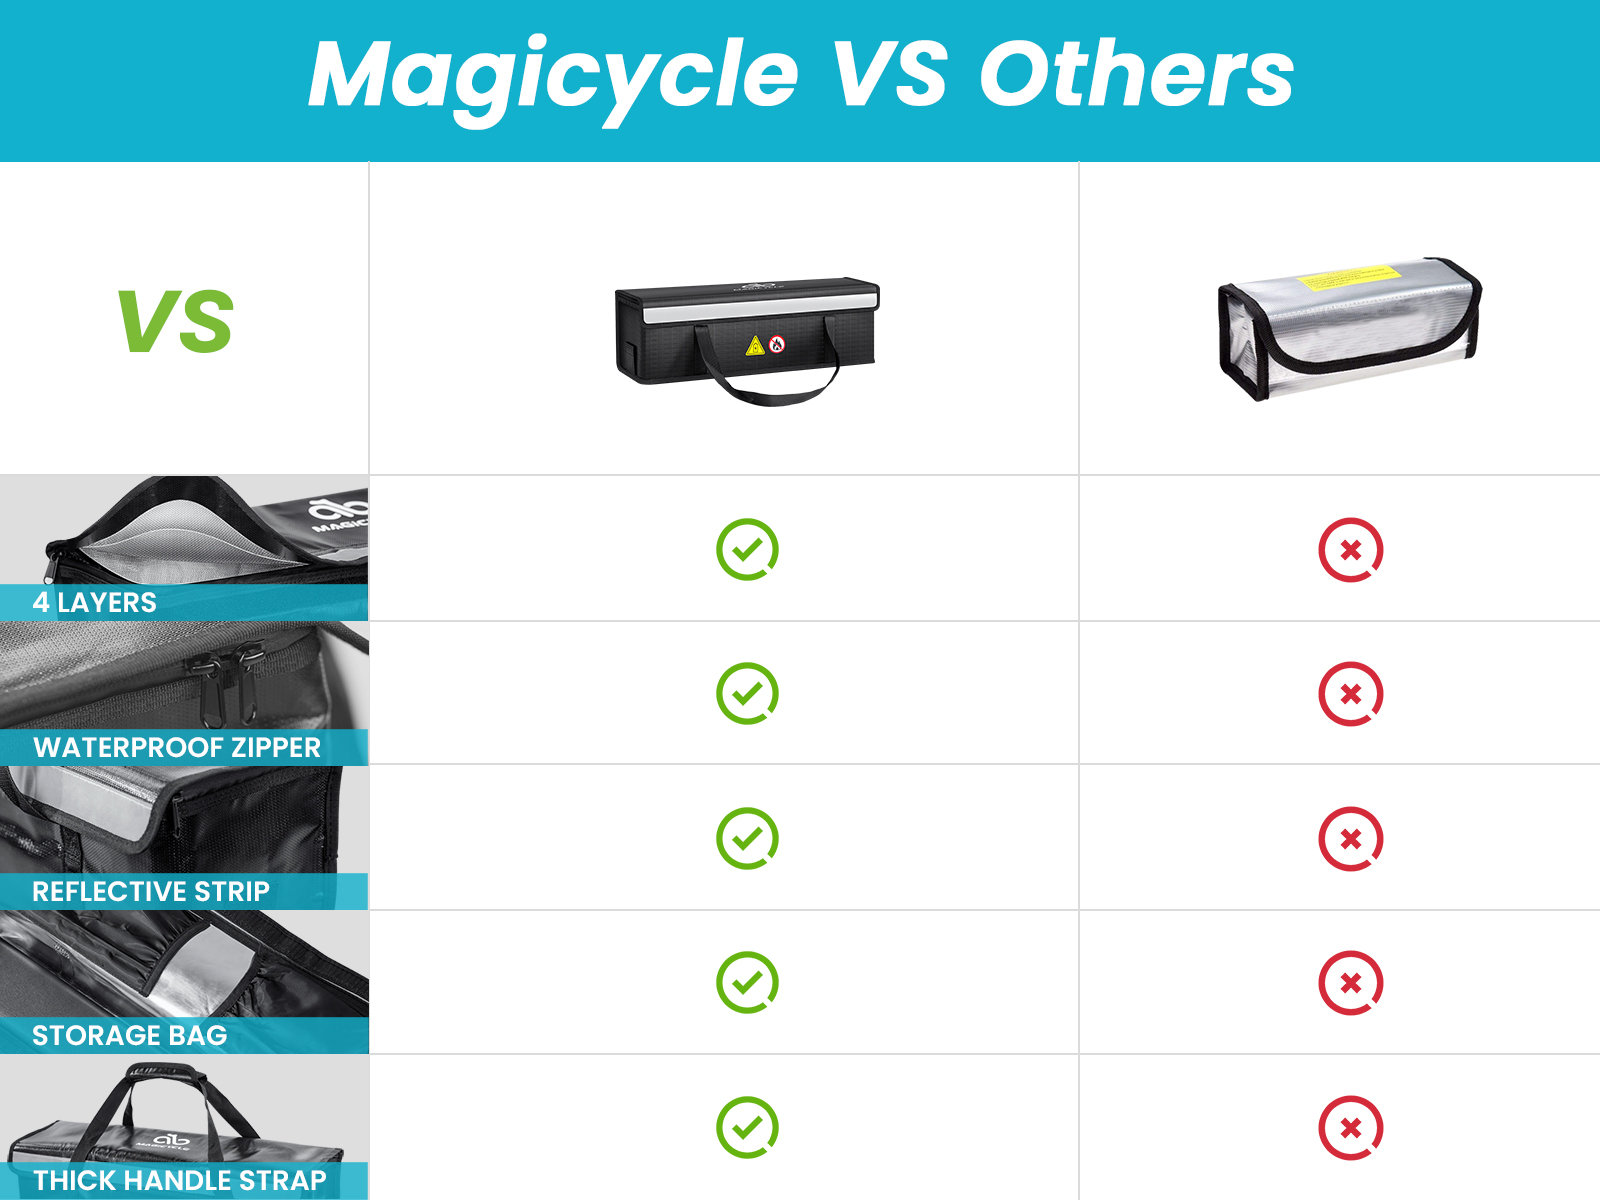 Magicycle Fireproof Battery Bag